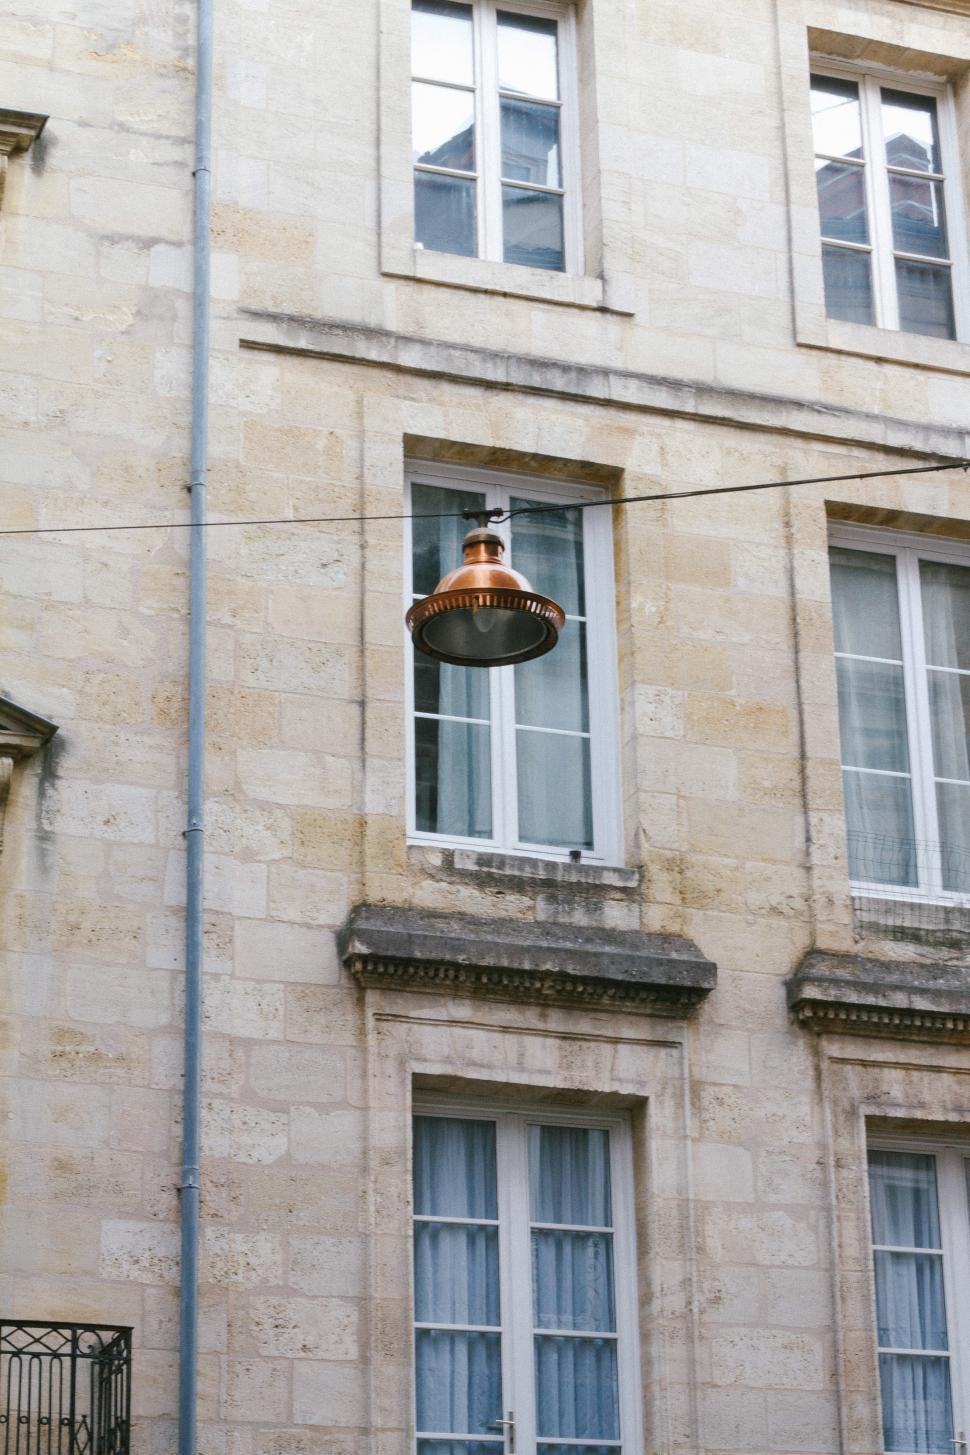 Free Image of Street Light Hanging From Wire in Front of Building 